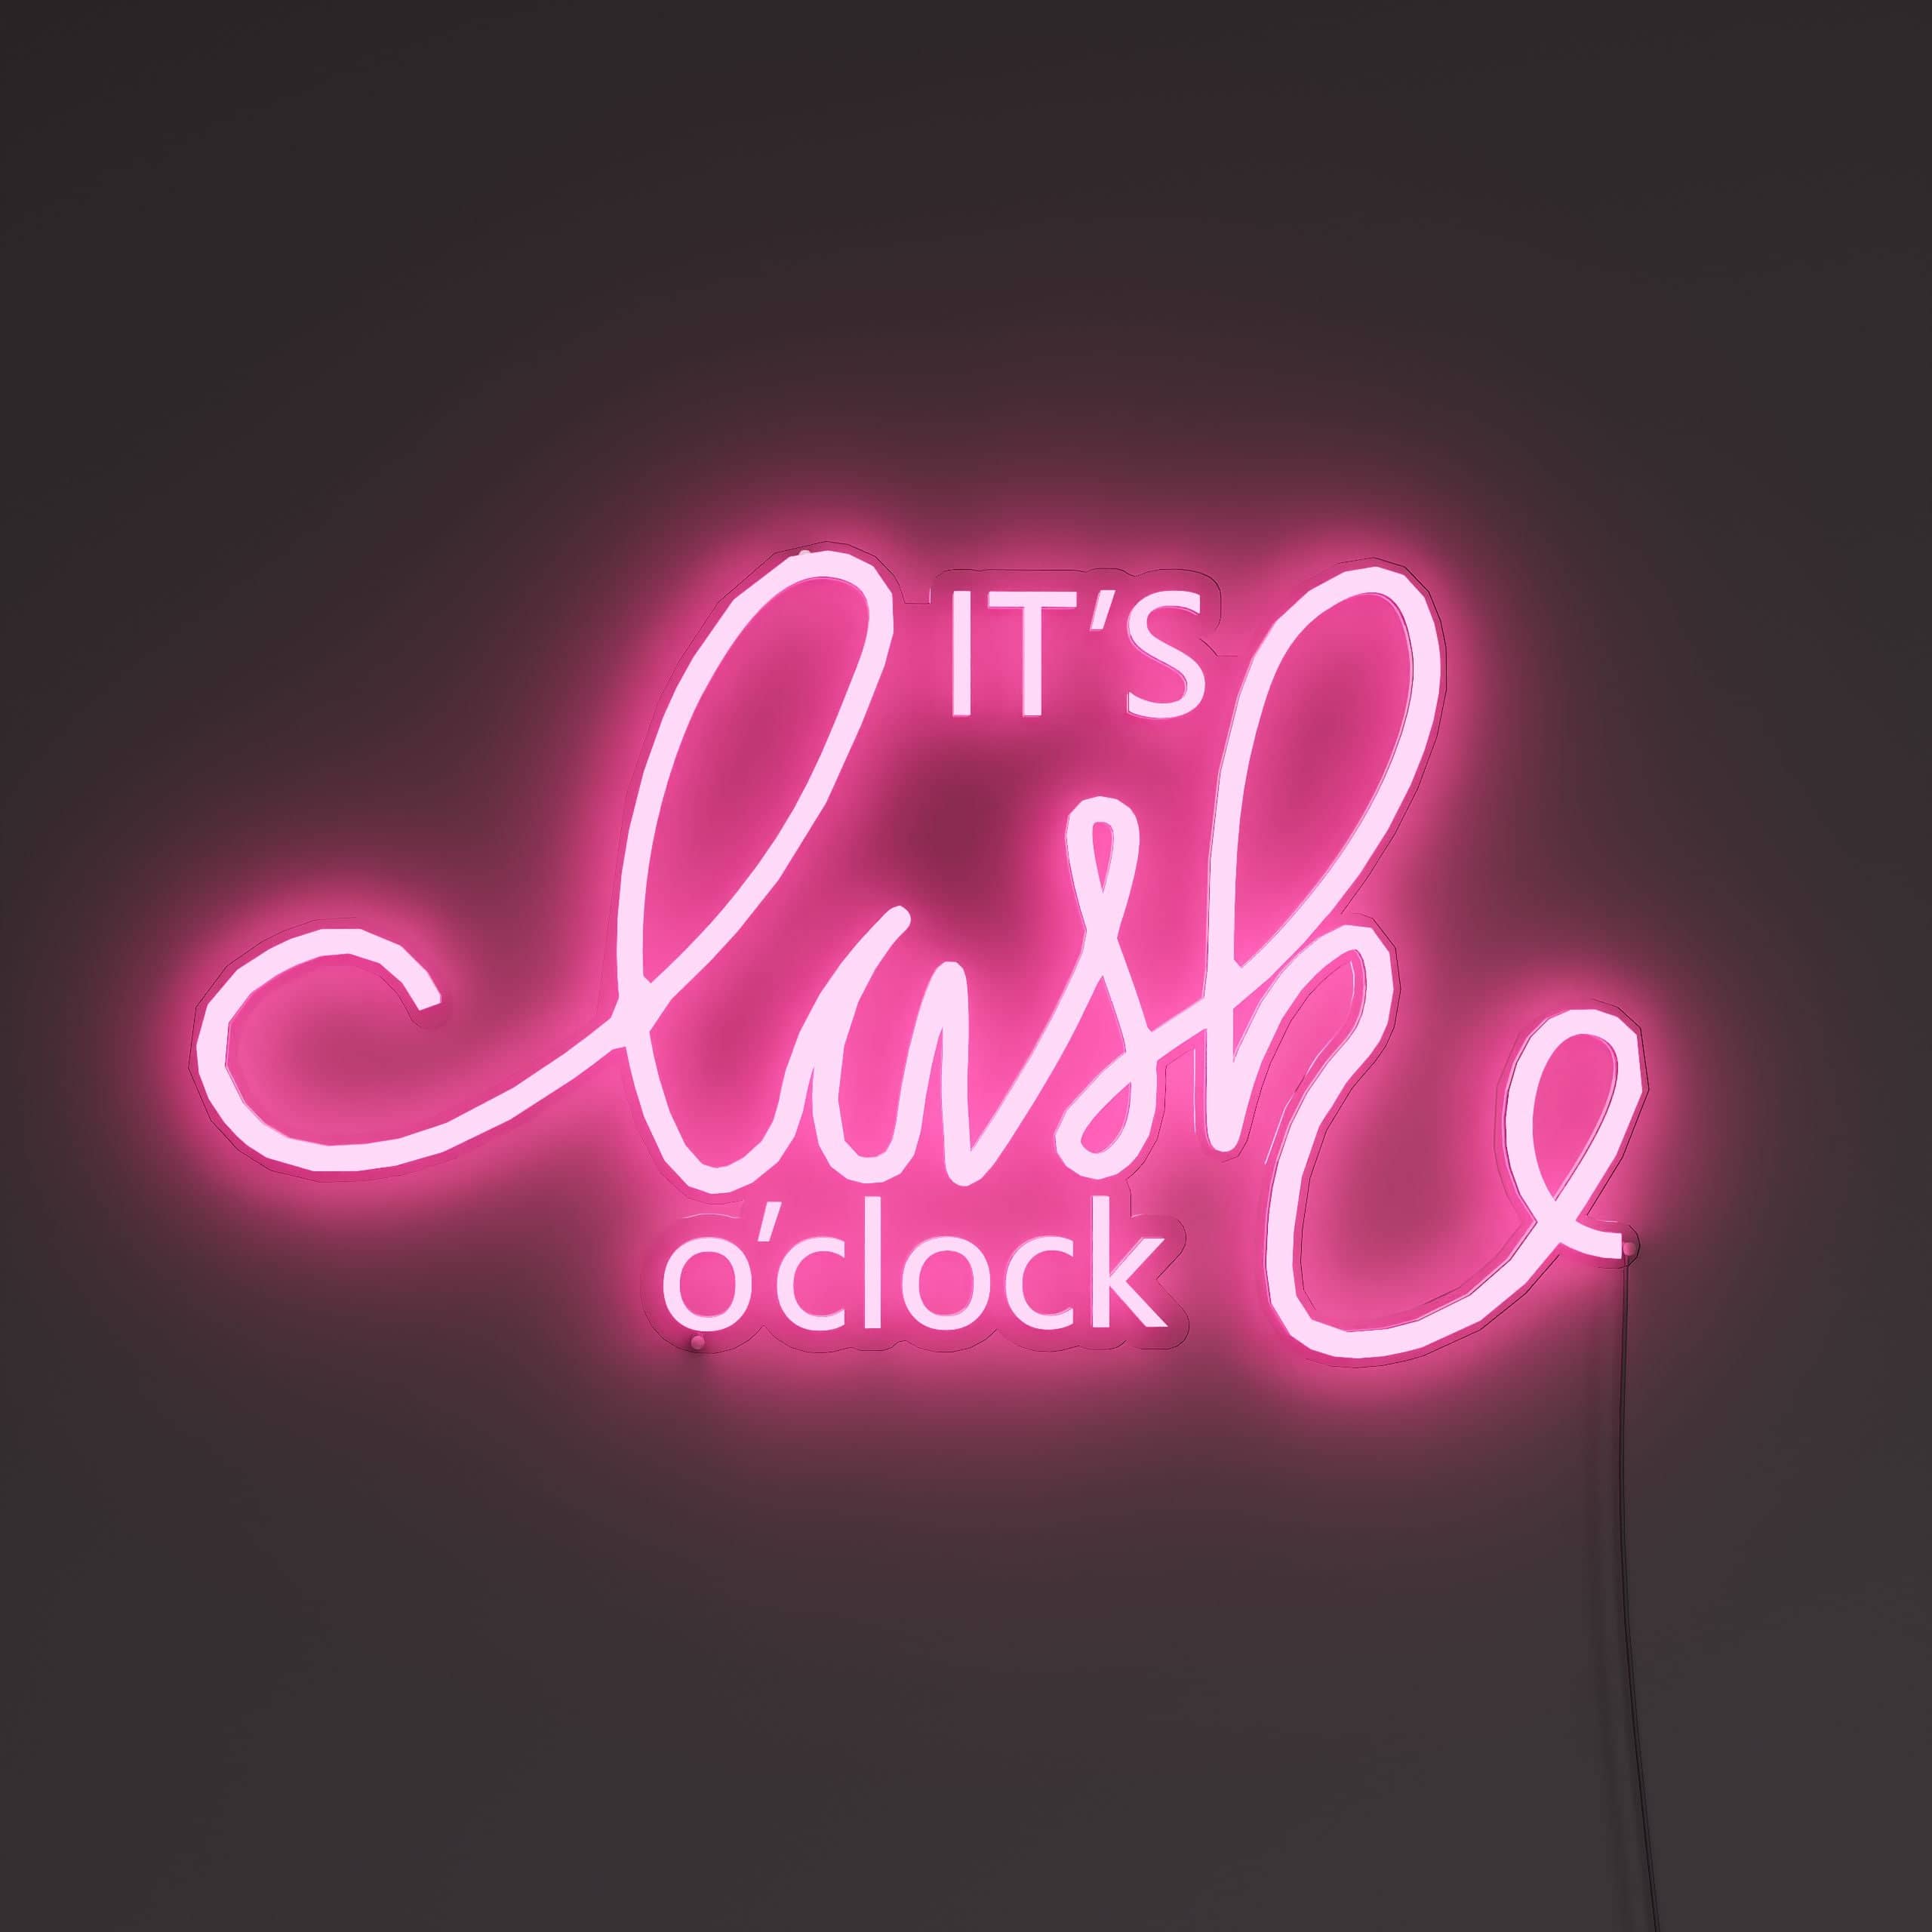 embrace-the-magic-of-the-clock!-neon-sign-lite